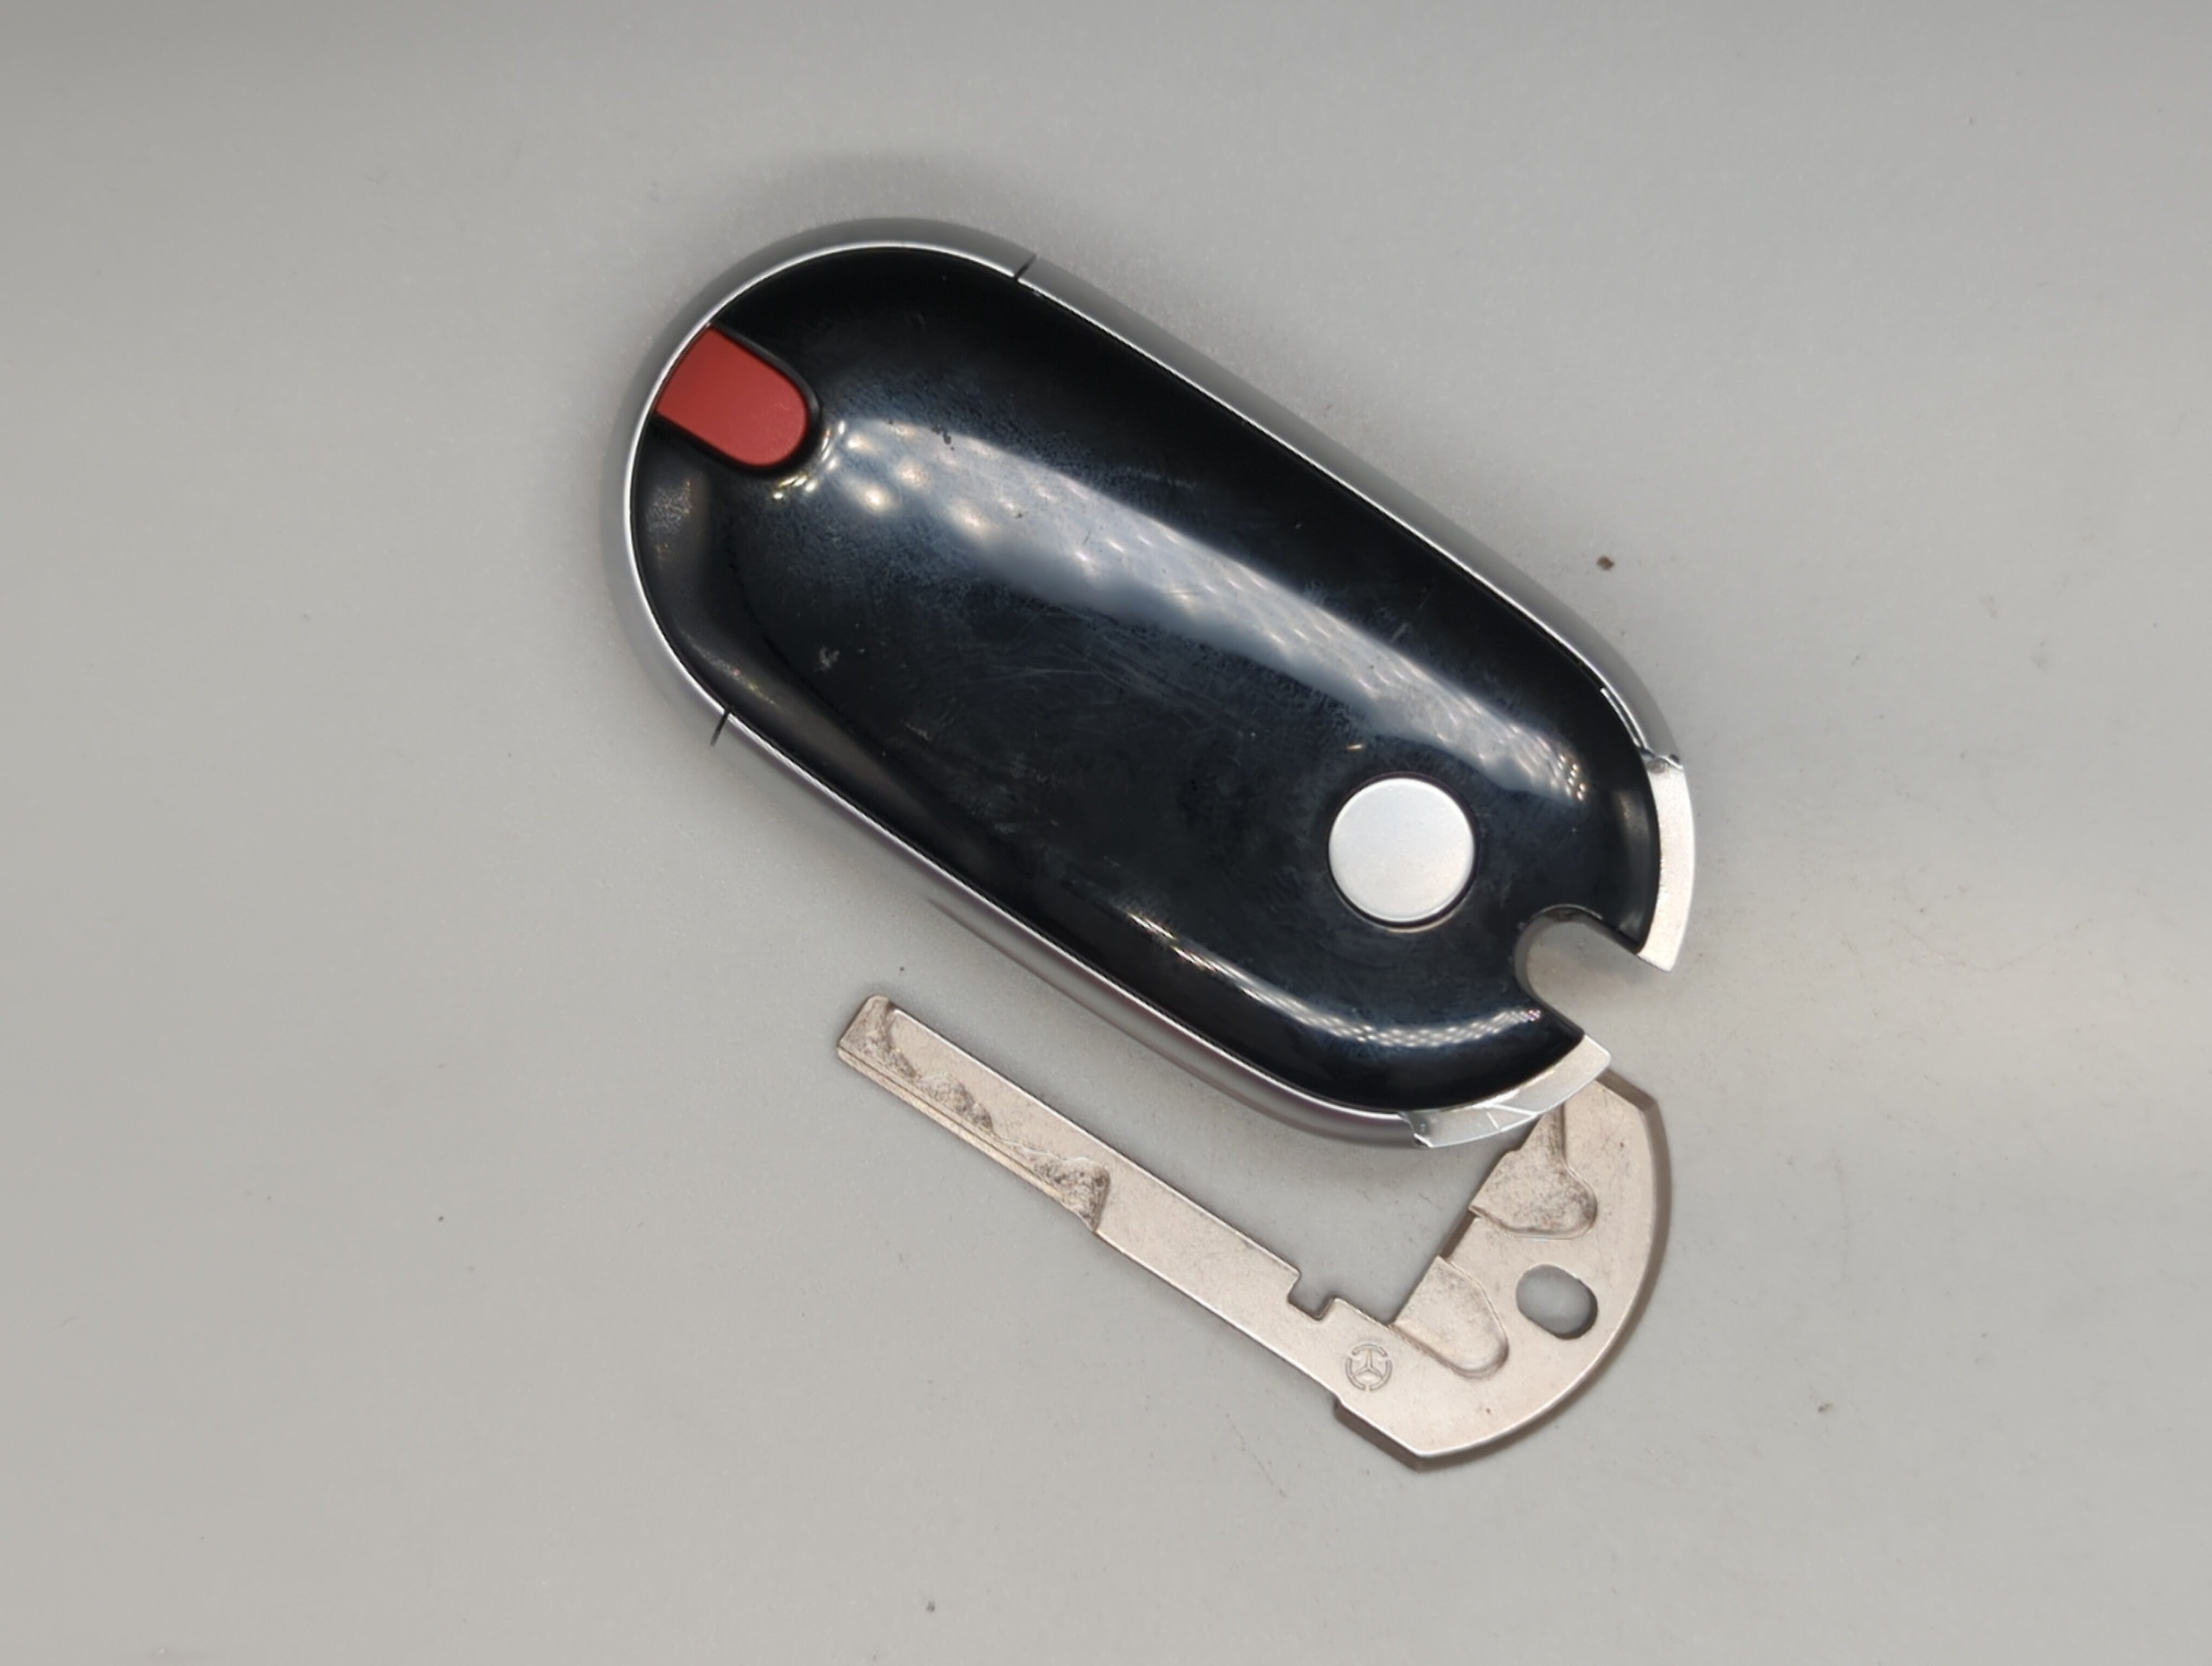 Mercedes-Benz Keyless Entry Remote Fob IYZMS4 4 buttons - Oemusedautoparts1.com